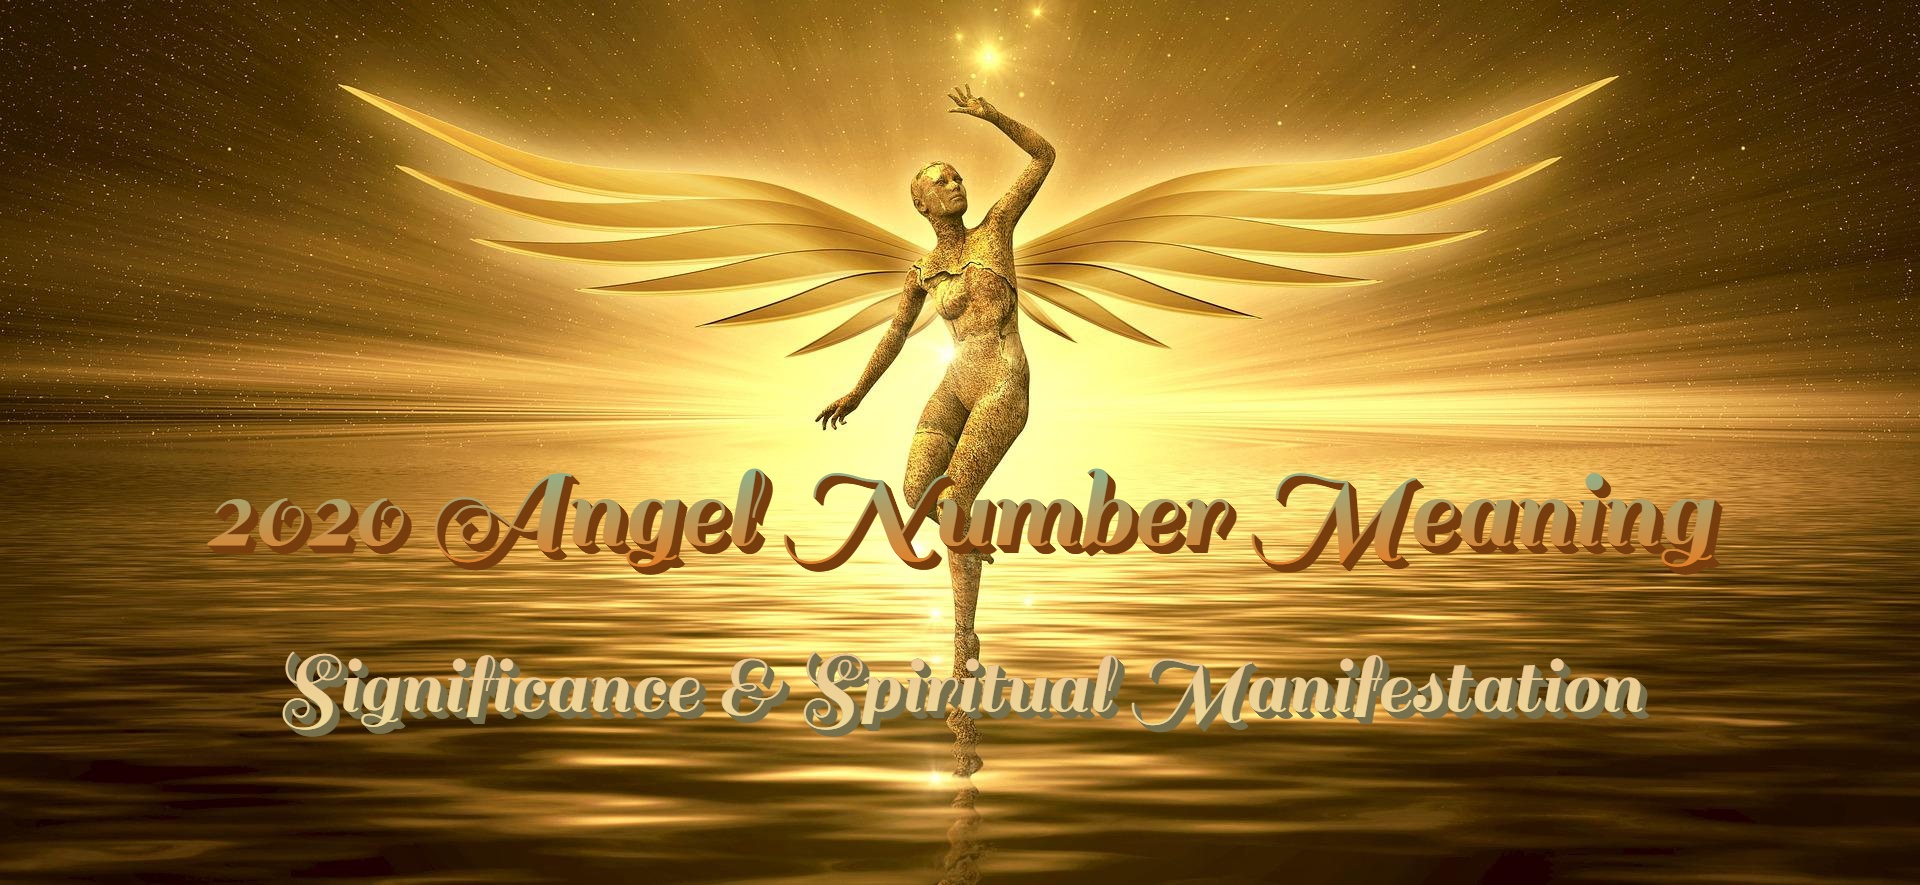 2020 Angel Number Meaning - Significance & Spiritual Manifestation